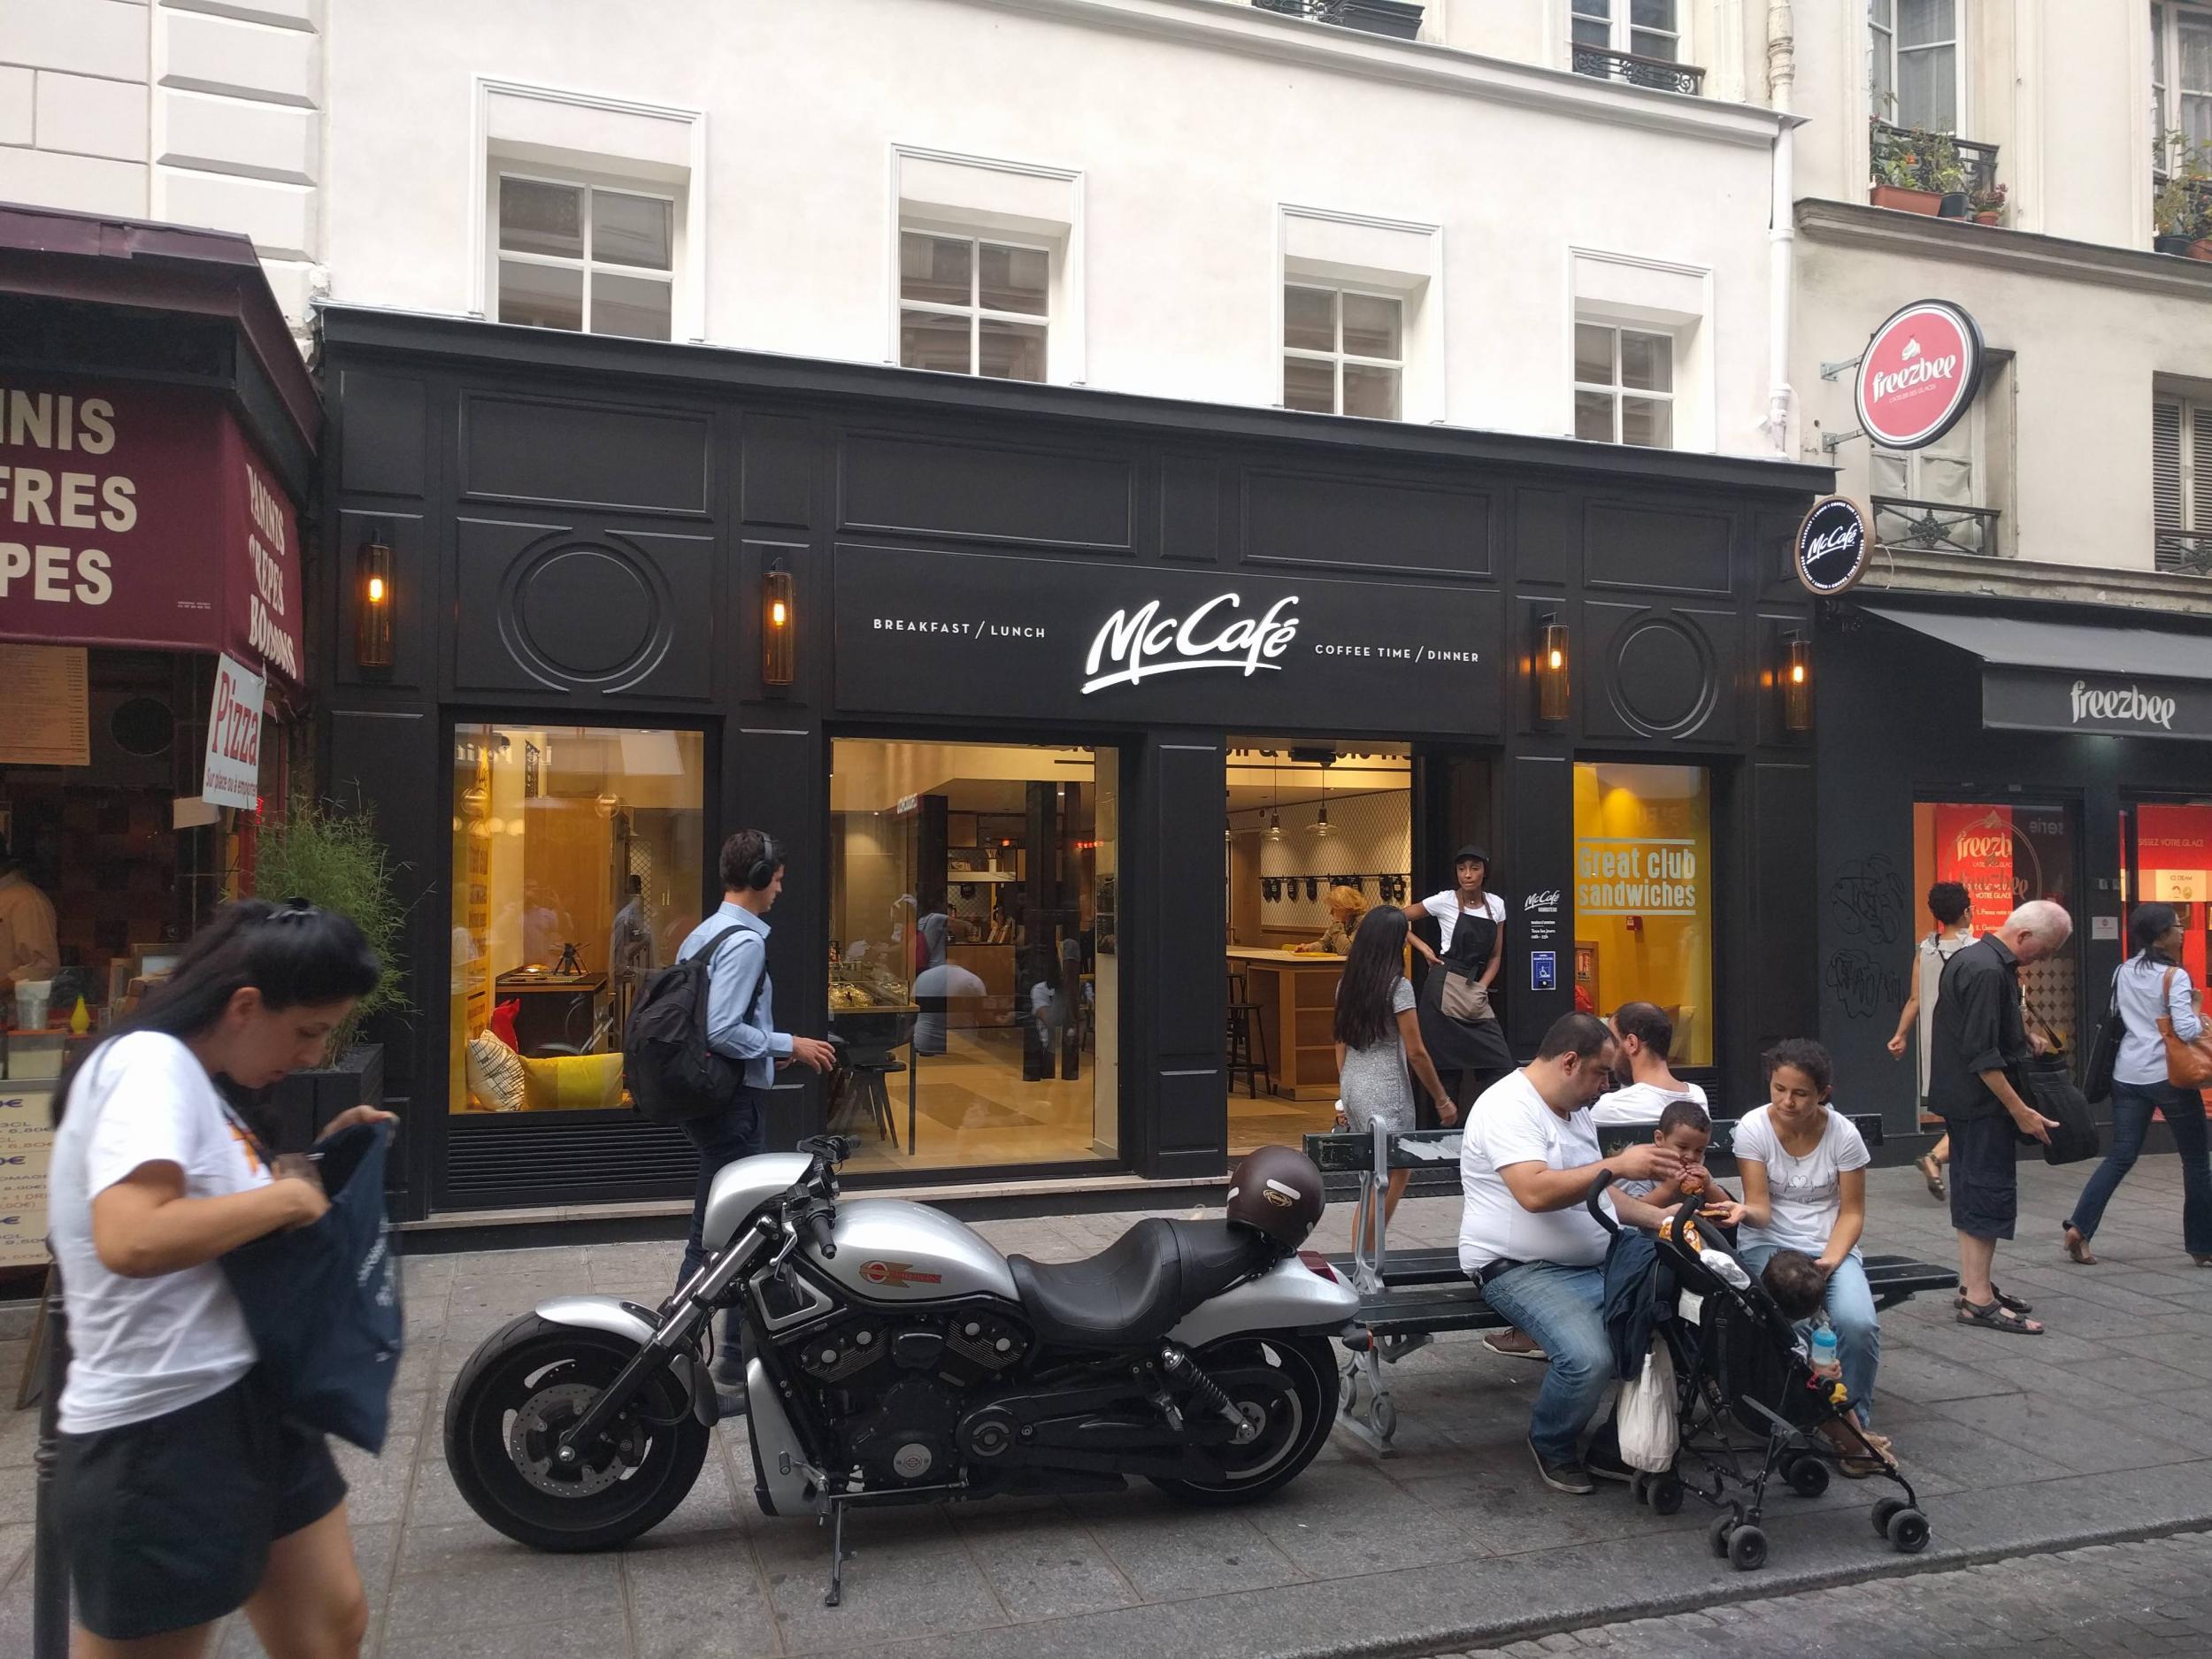 The new McCafe restaurant in central Pariss